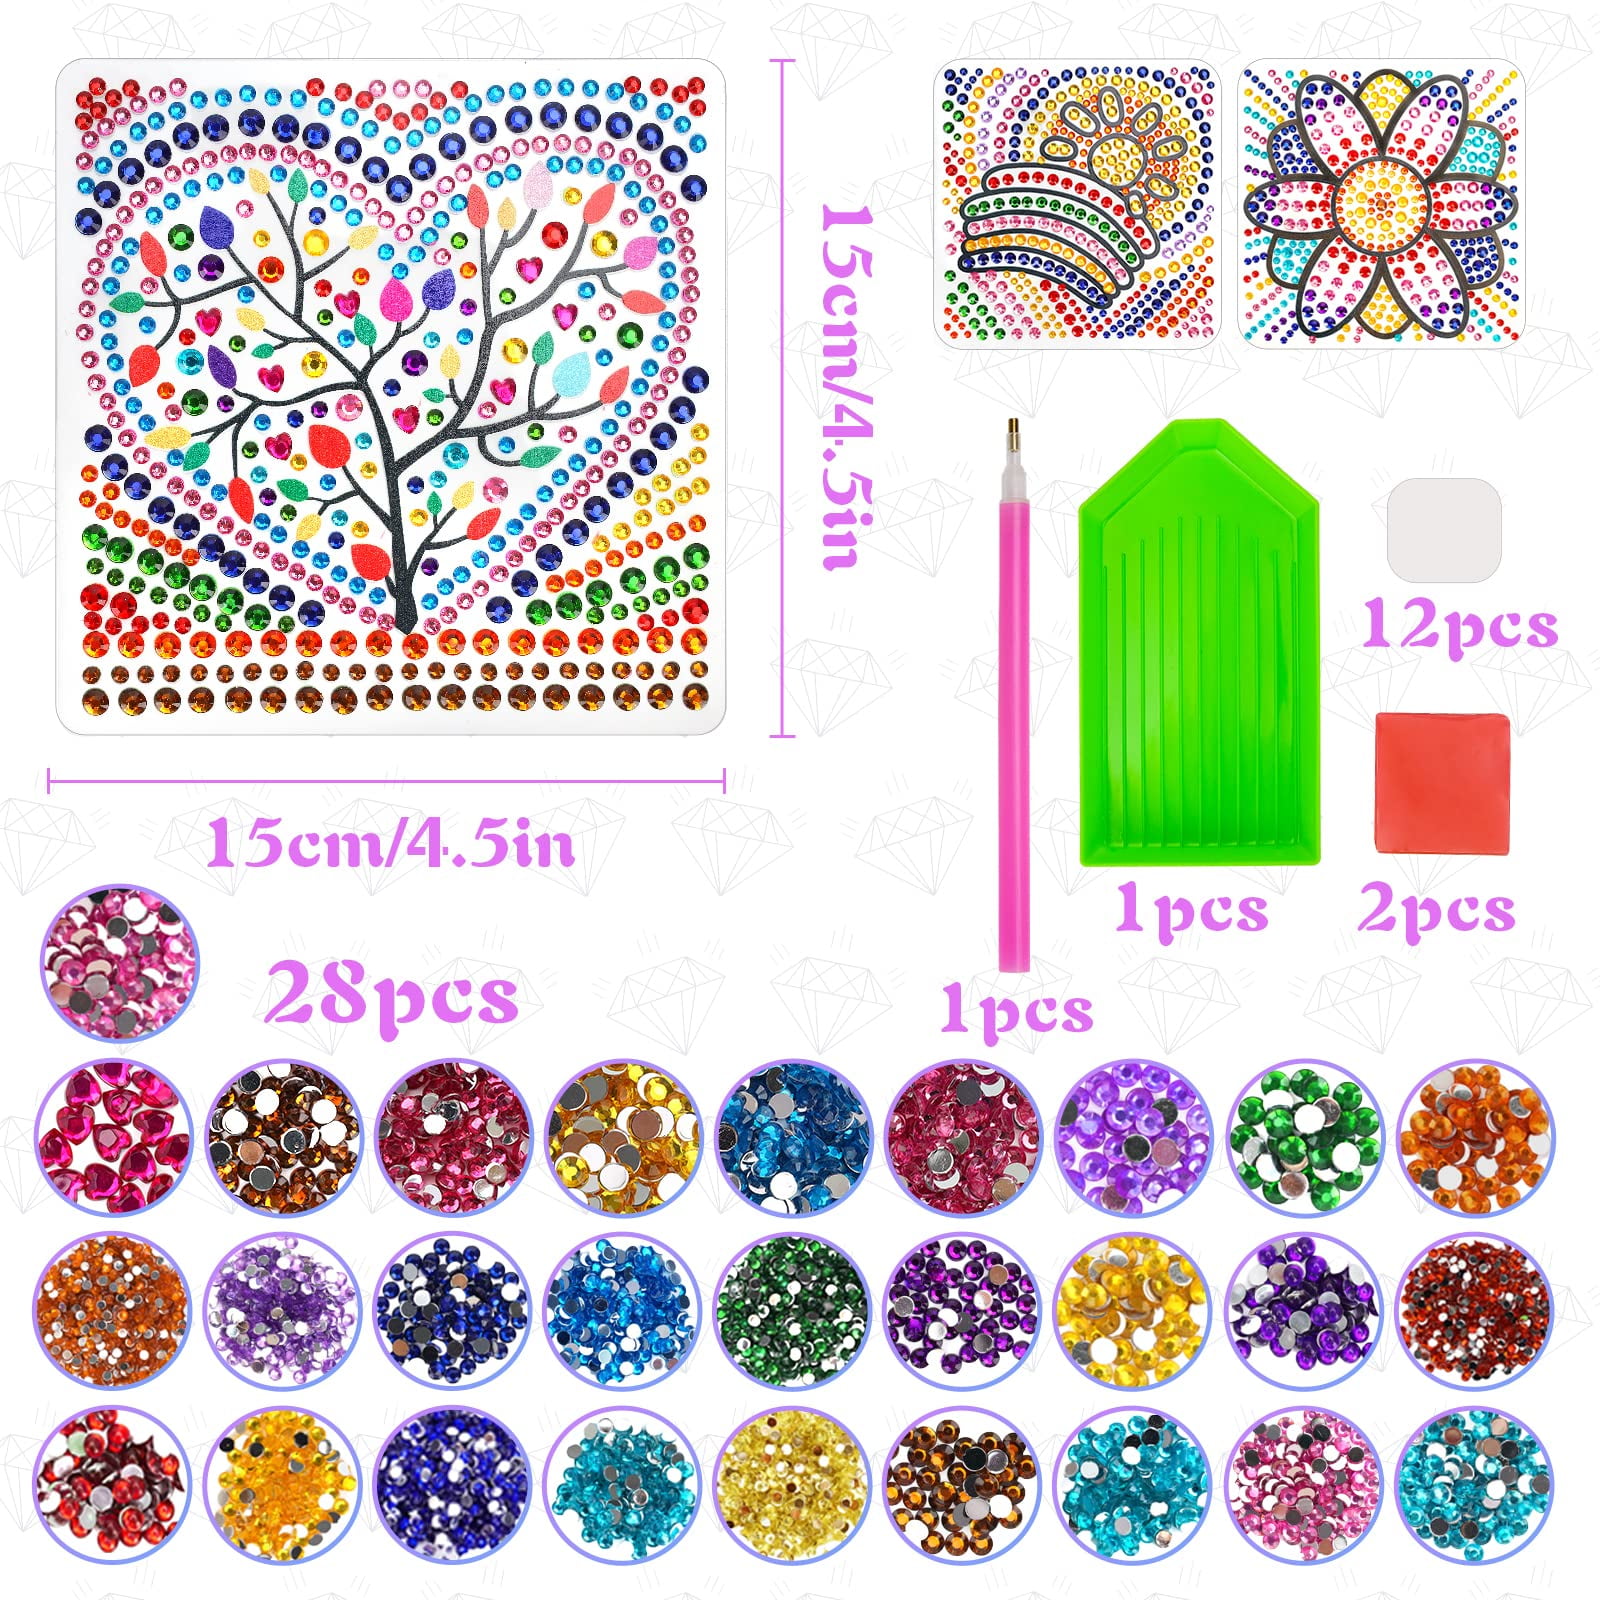 Crafts for Girls 8-12 - Arts and Crafts for Kids Ages 8-12 - 6Pcs Window  Gem Art Suncatcher Kits - 4 5 6 7 8 Year Old Girl Birthday Gifts - Diamond